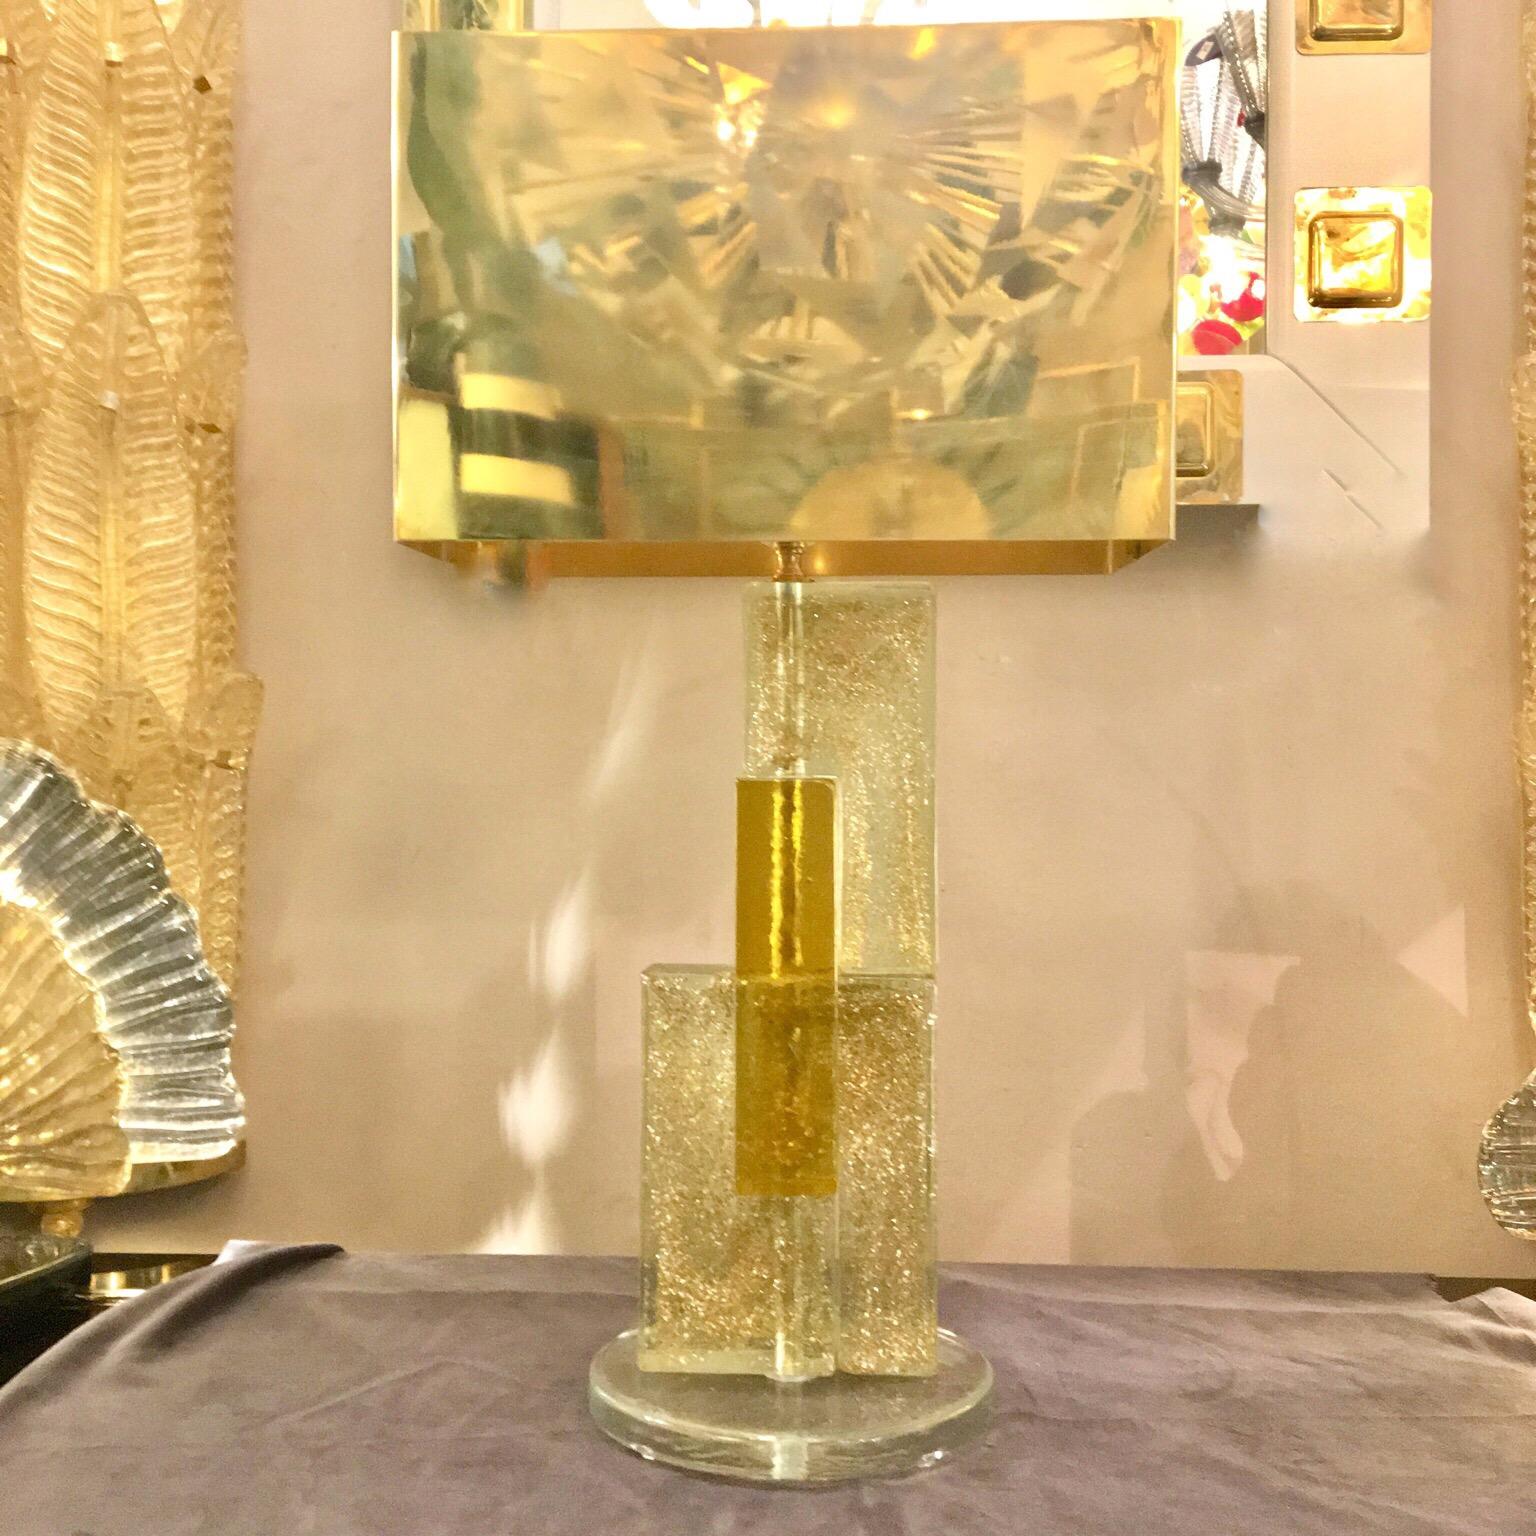 Handcrafted Murano glass table lamp, yellow glass and clear glass infused with gold flecks, rectangular brass lampshade. Round clear glass base. One bulb.